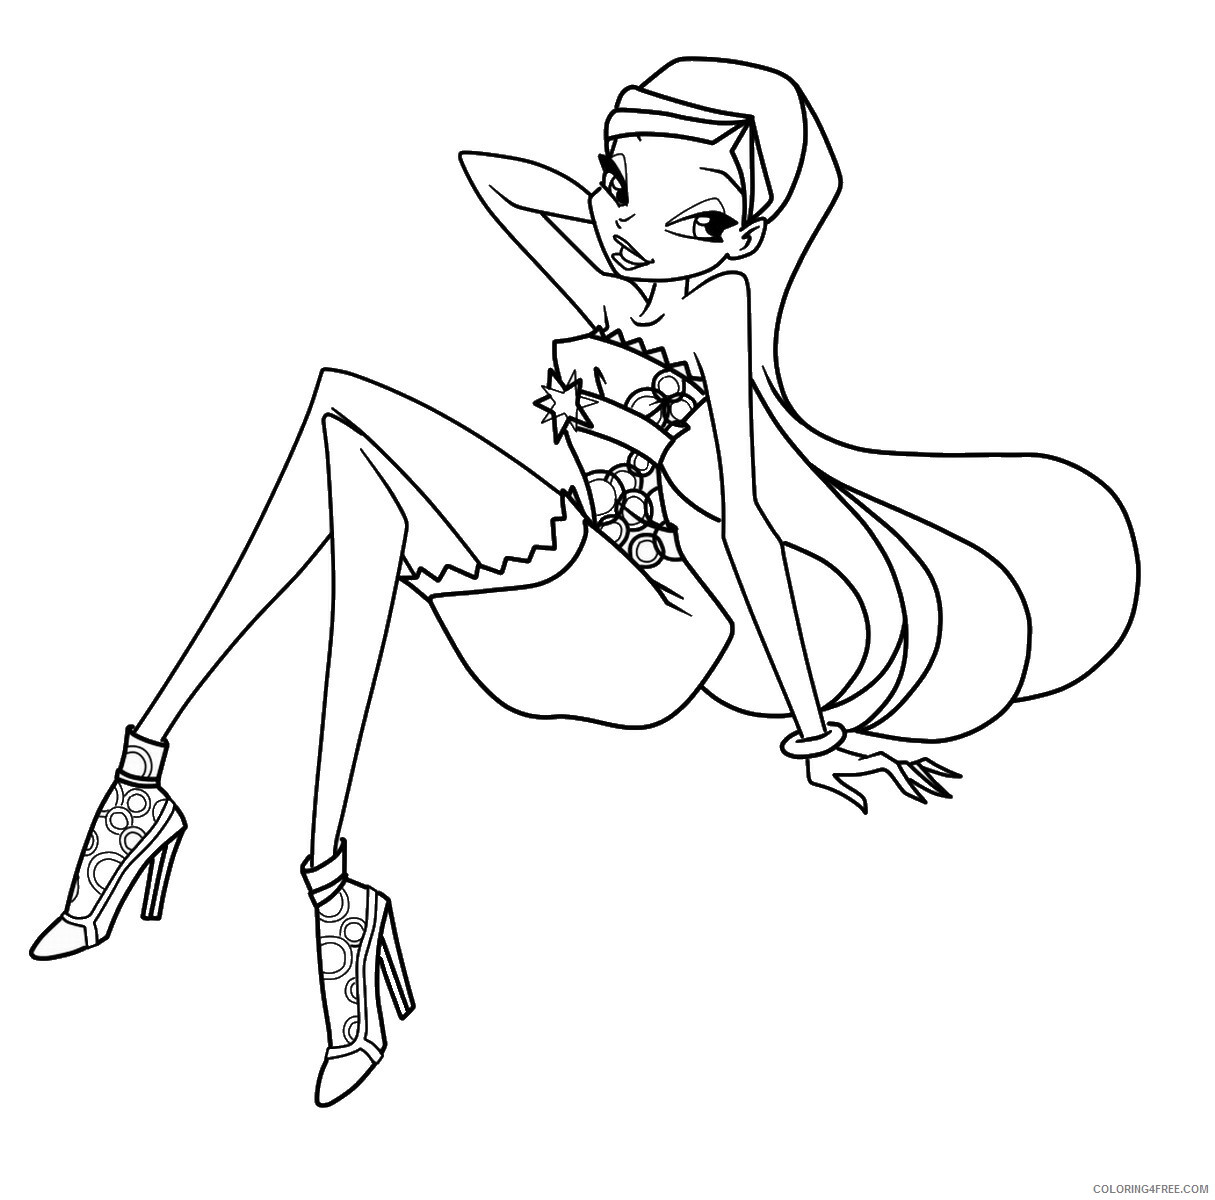 Winx Coloring Pages TV Film winx_cl_08 Printable 2020 11371 Coloring4free